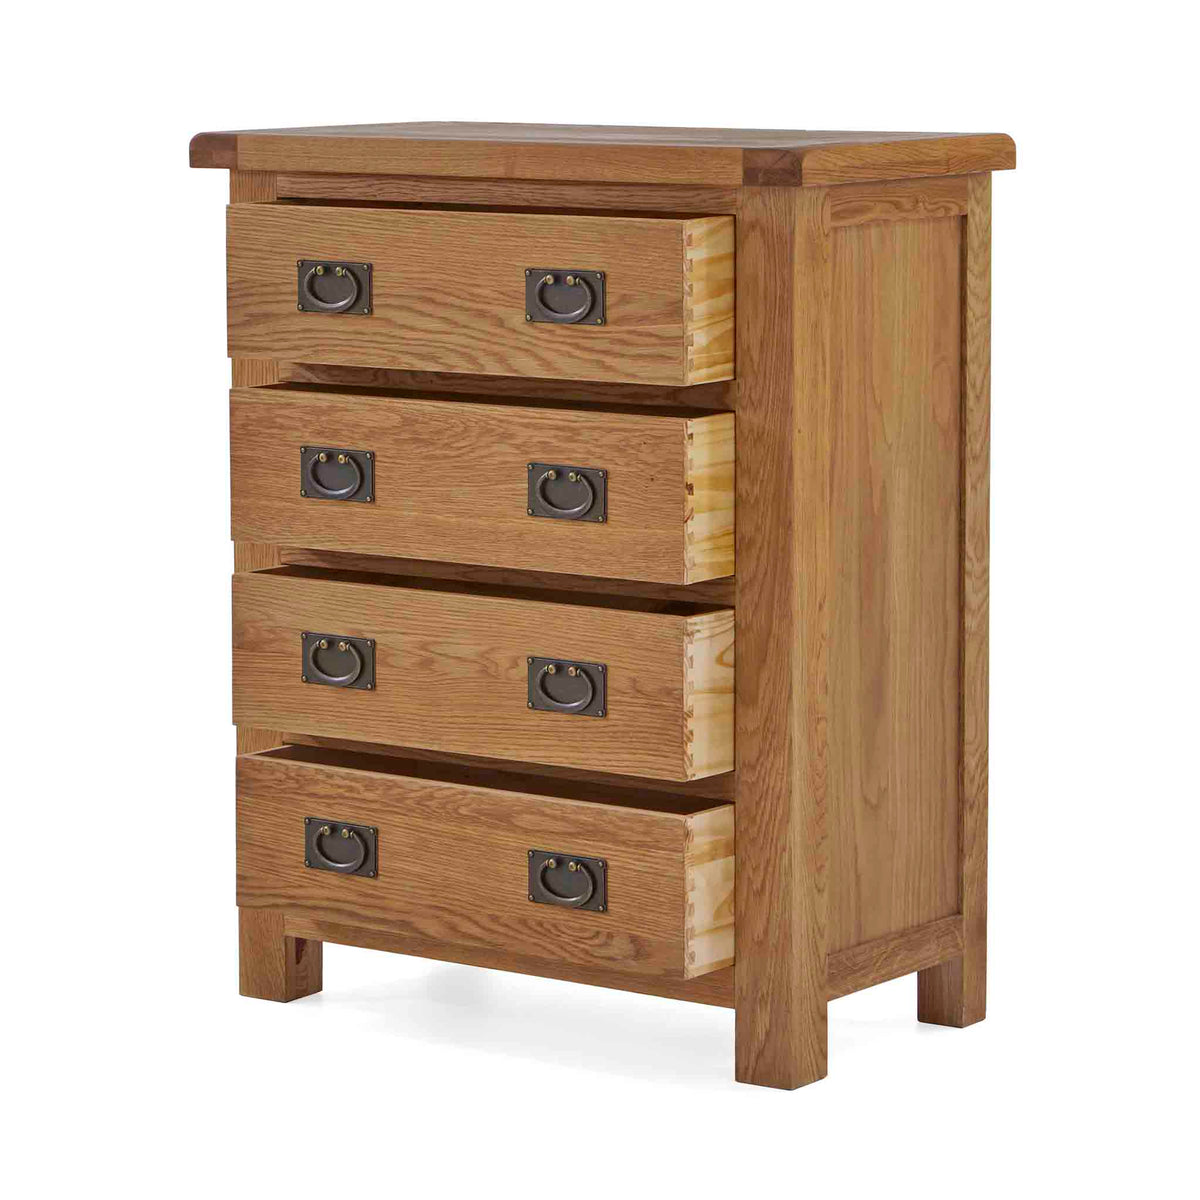 Zelah Oak 4 Drawer Chest - Side view with drawers open